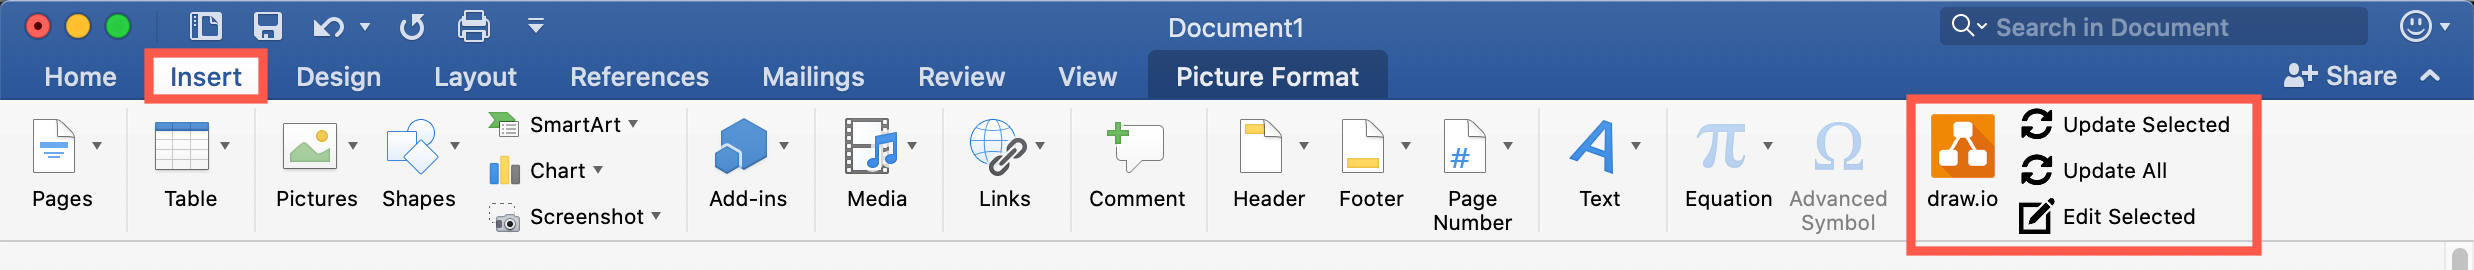 Update the diagram images in your document after you have edited the diagram files